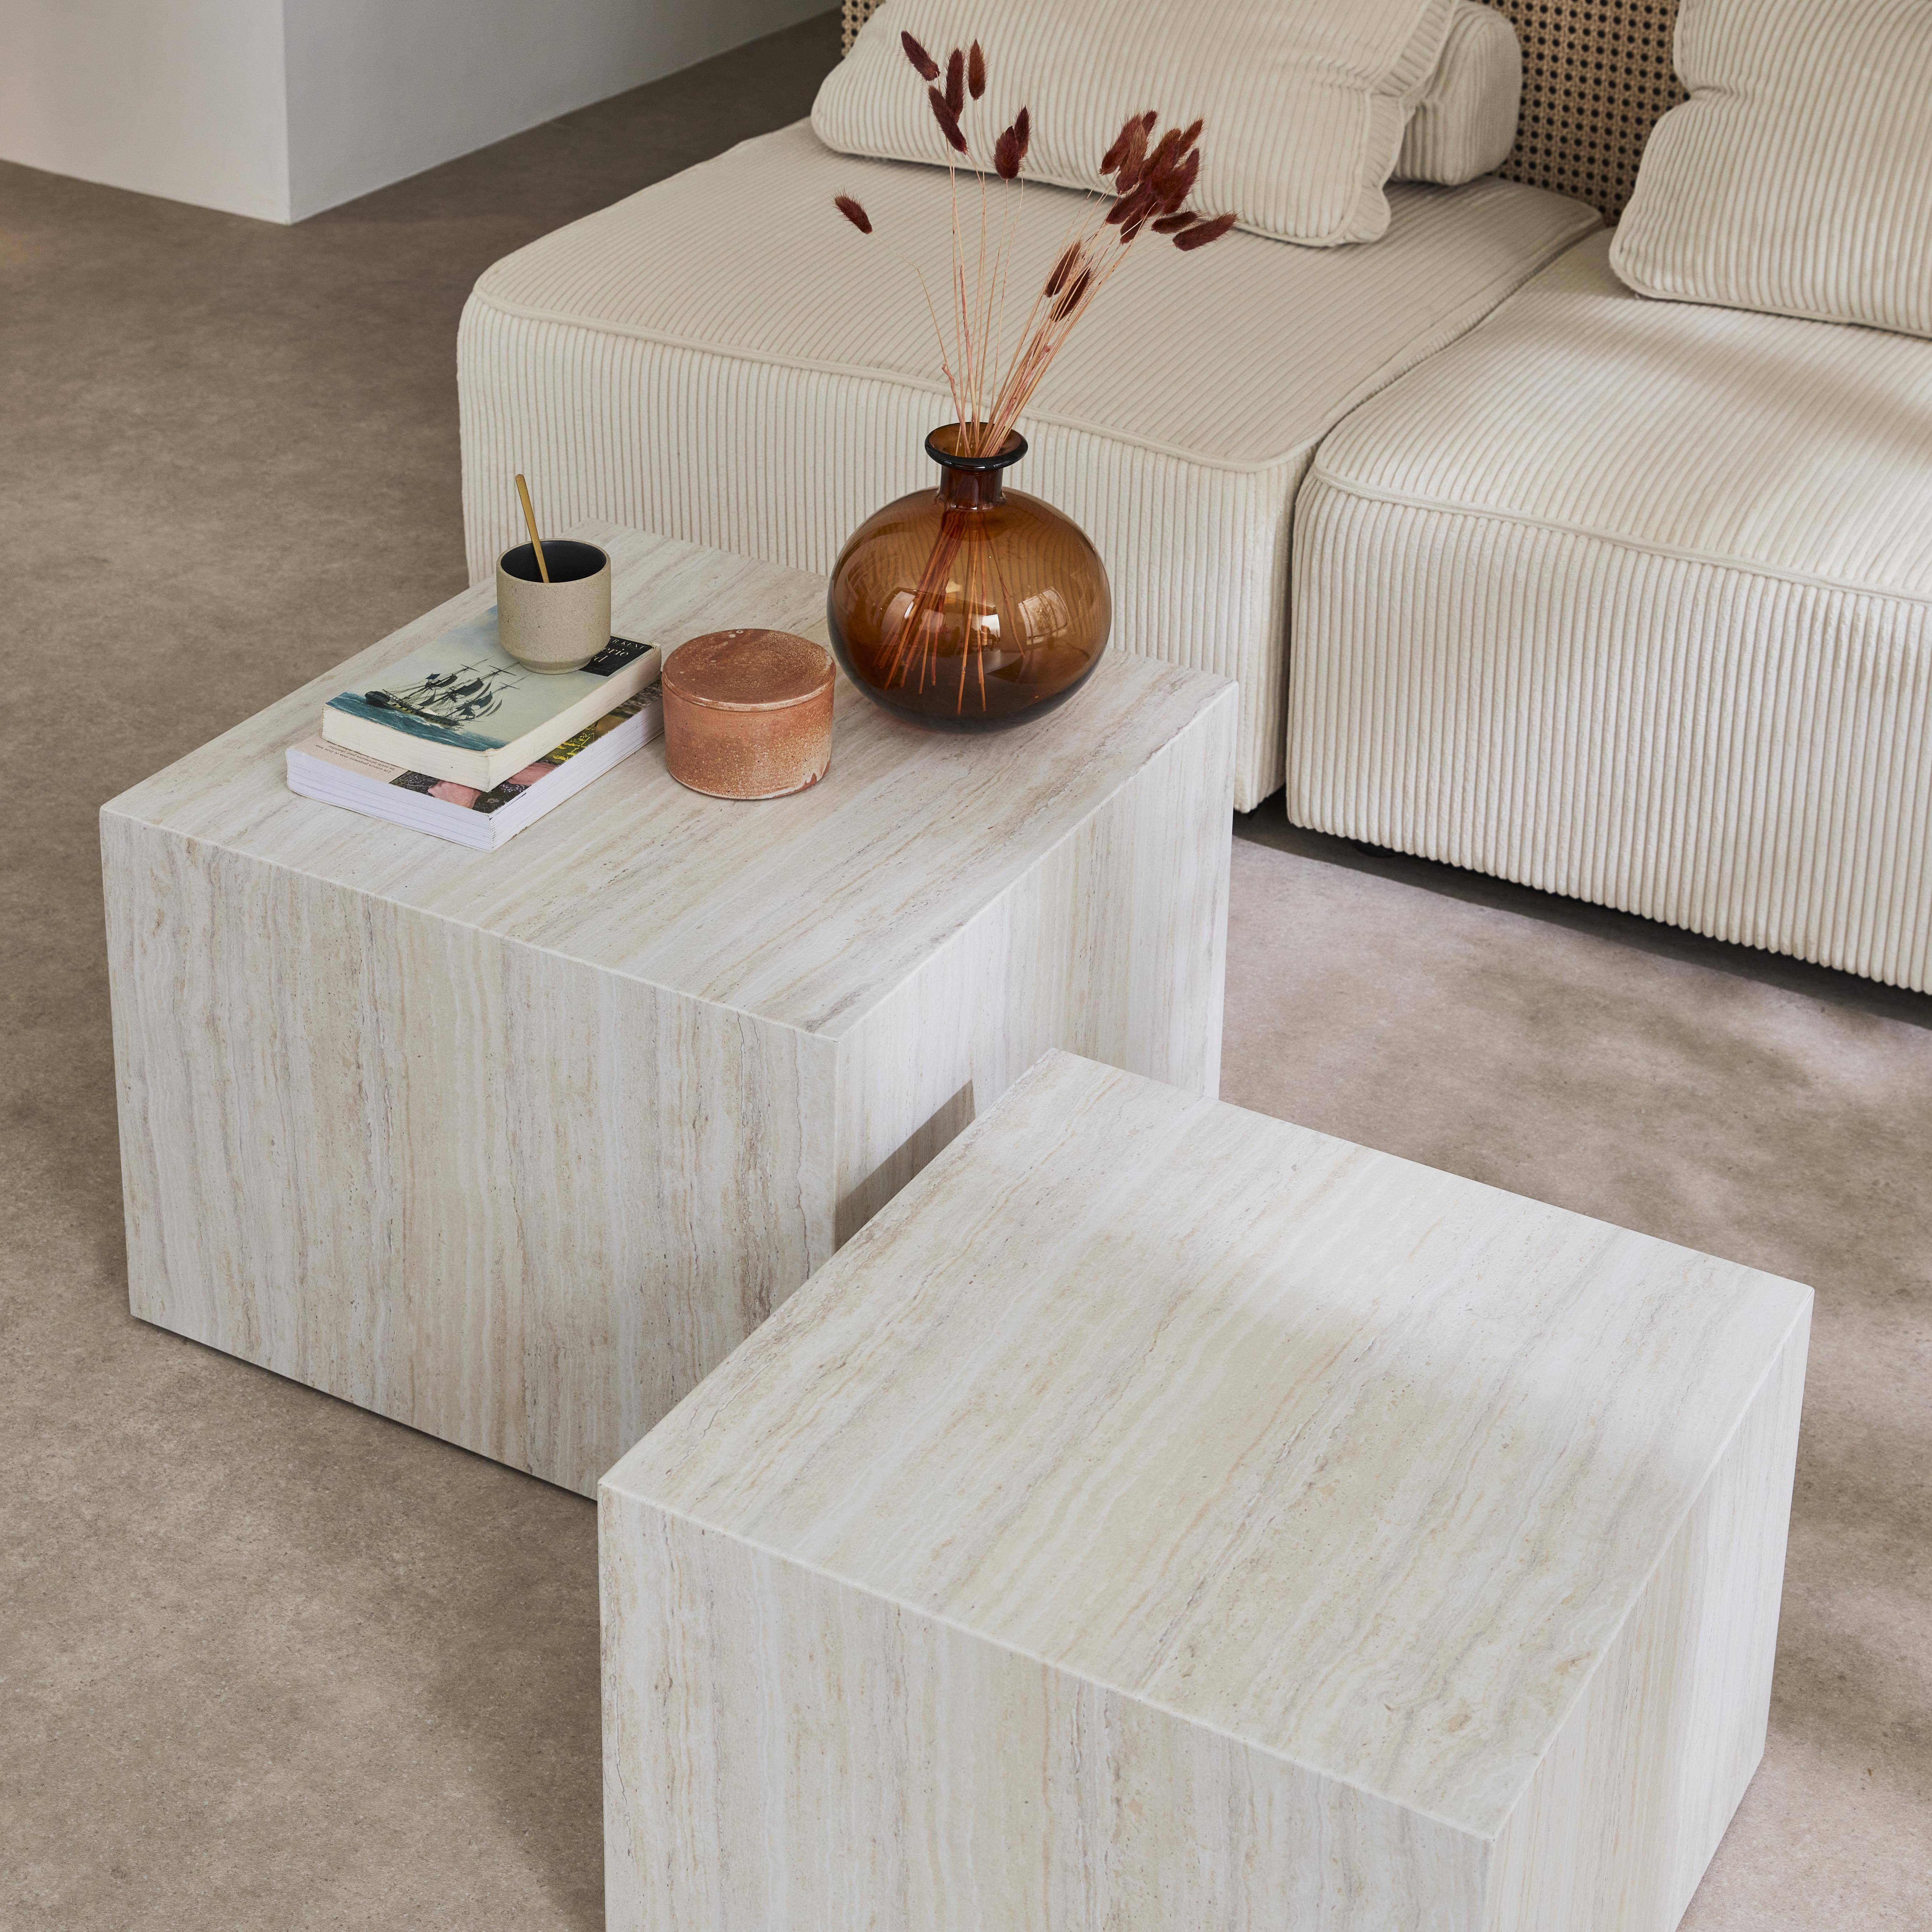 Set of 2 square coffee tables with marble effect, white, L50xW50xH33cm &  L58xW58xH40cm, Paros,sweeek,Photo2